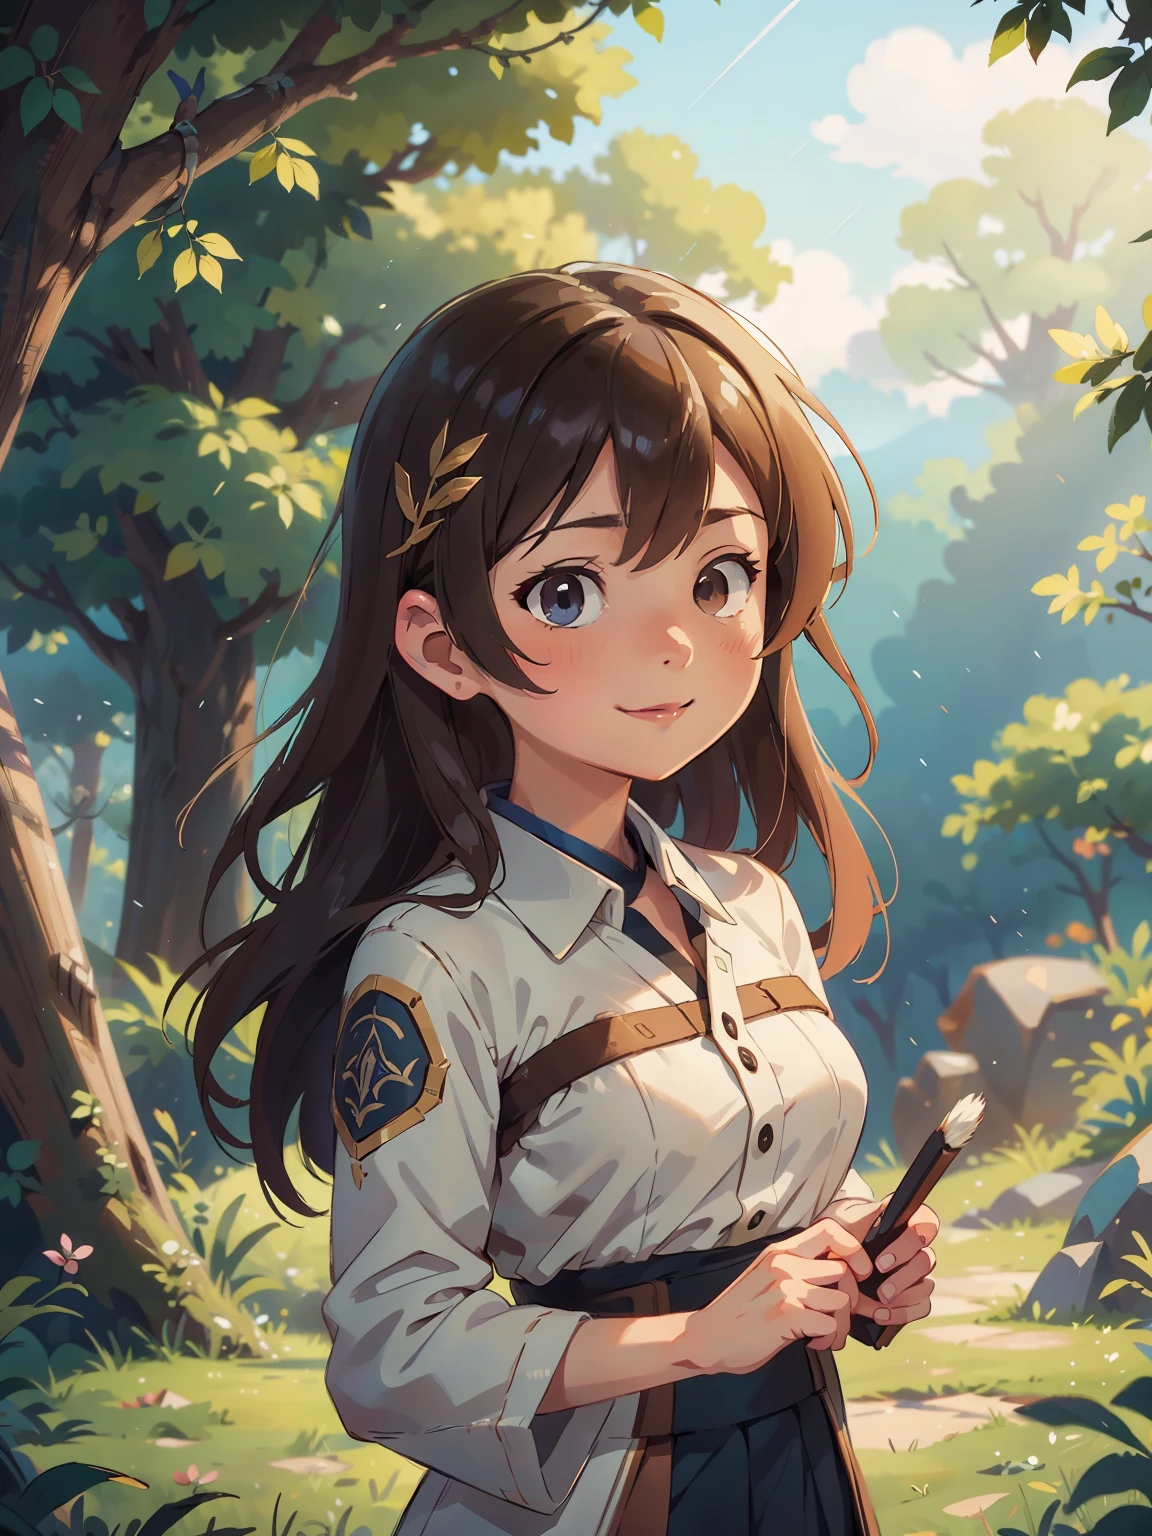 shinkai Mokoto and Ghibli anime style, three girls and a boy are standing in front of a night sky, girls frontline universe, guweiz on pixiv artstation, girls frontline cg, 4 k manga wallpaper, artwork in the style of guweiz, best anime 4k konachan wallpaper, best quality, realistic portrait of a young woman, traditional oil painting, vibrant colors, glowing skin, captivating eyes, flowing hair, subtle smile, delicate facial features, intricate details, fine brush strokes, exquisite attire, elegant pose, soft natural lighting, timeless beauty
INFO
